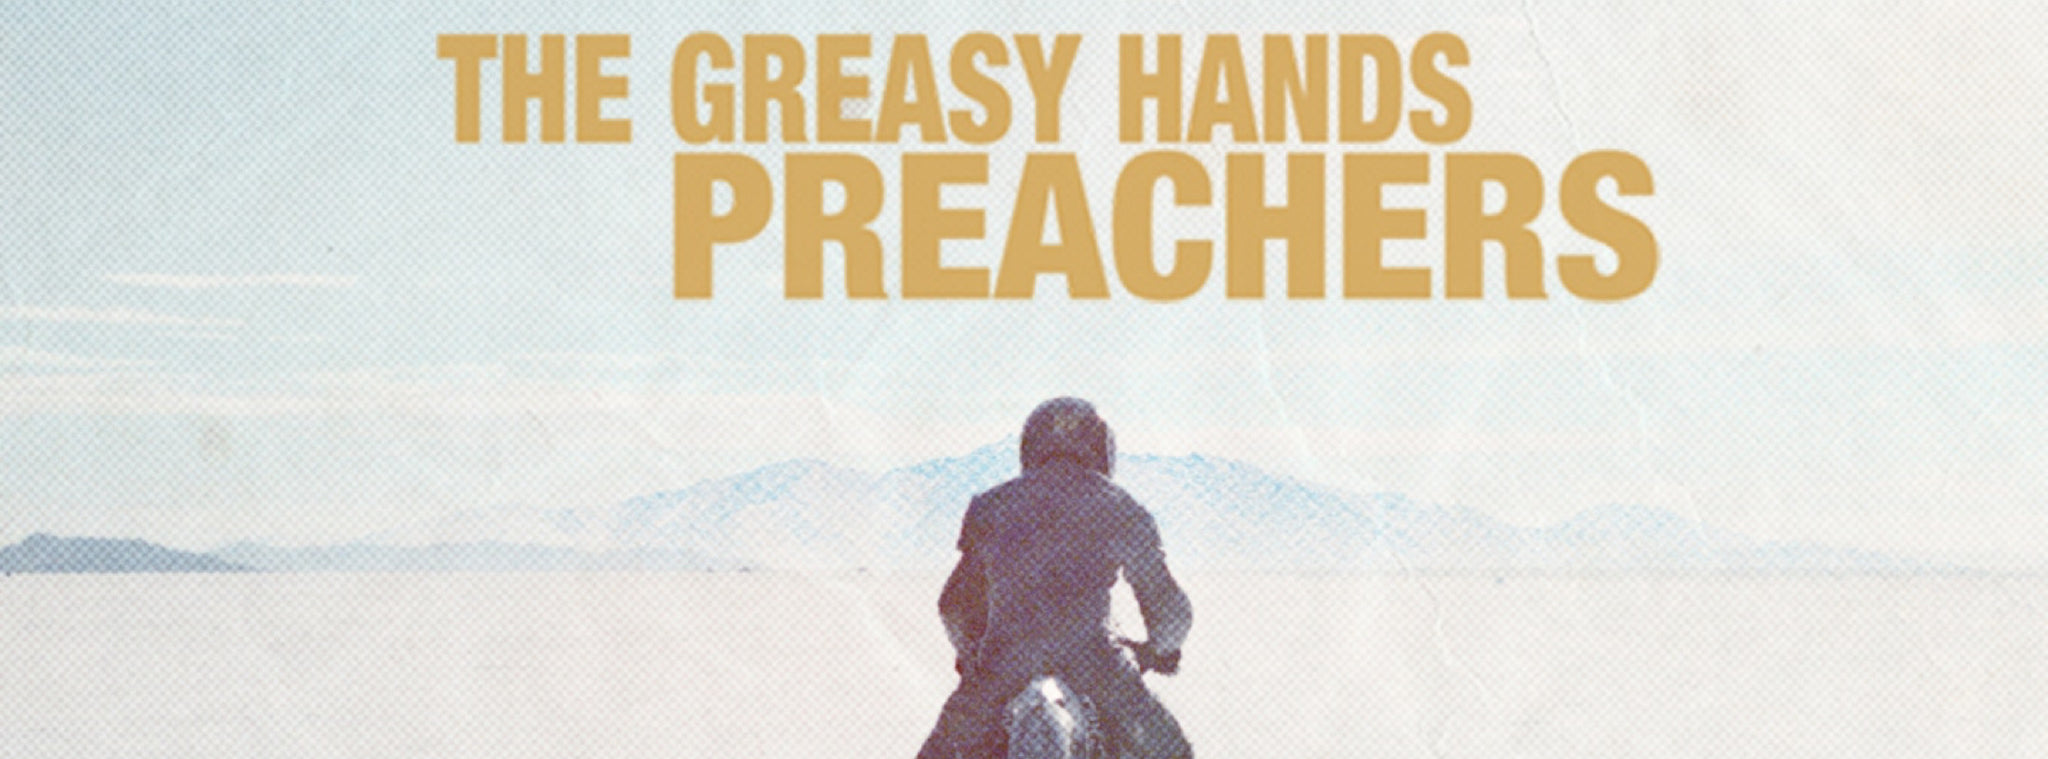 The Greasy Hands Preachers - Free !